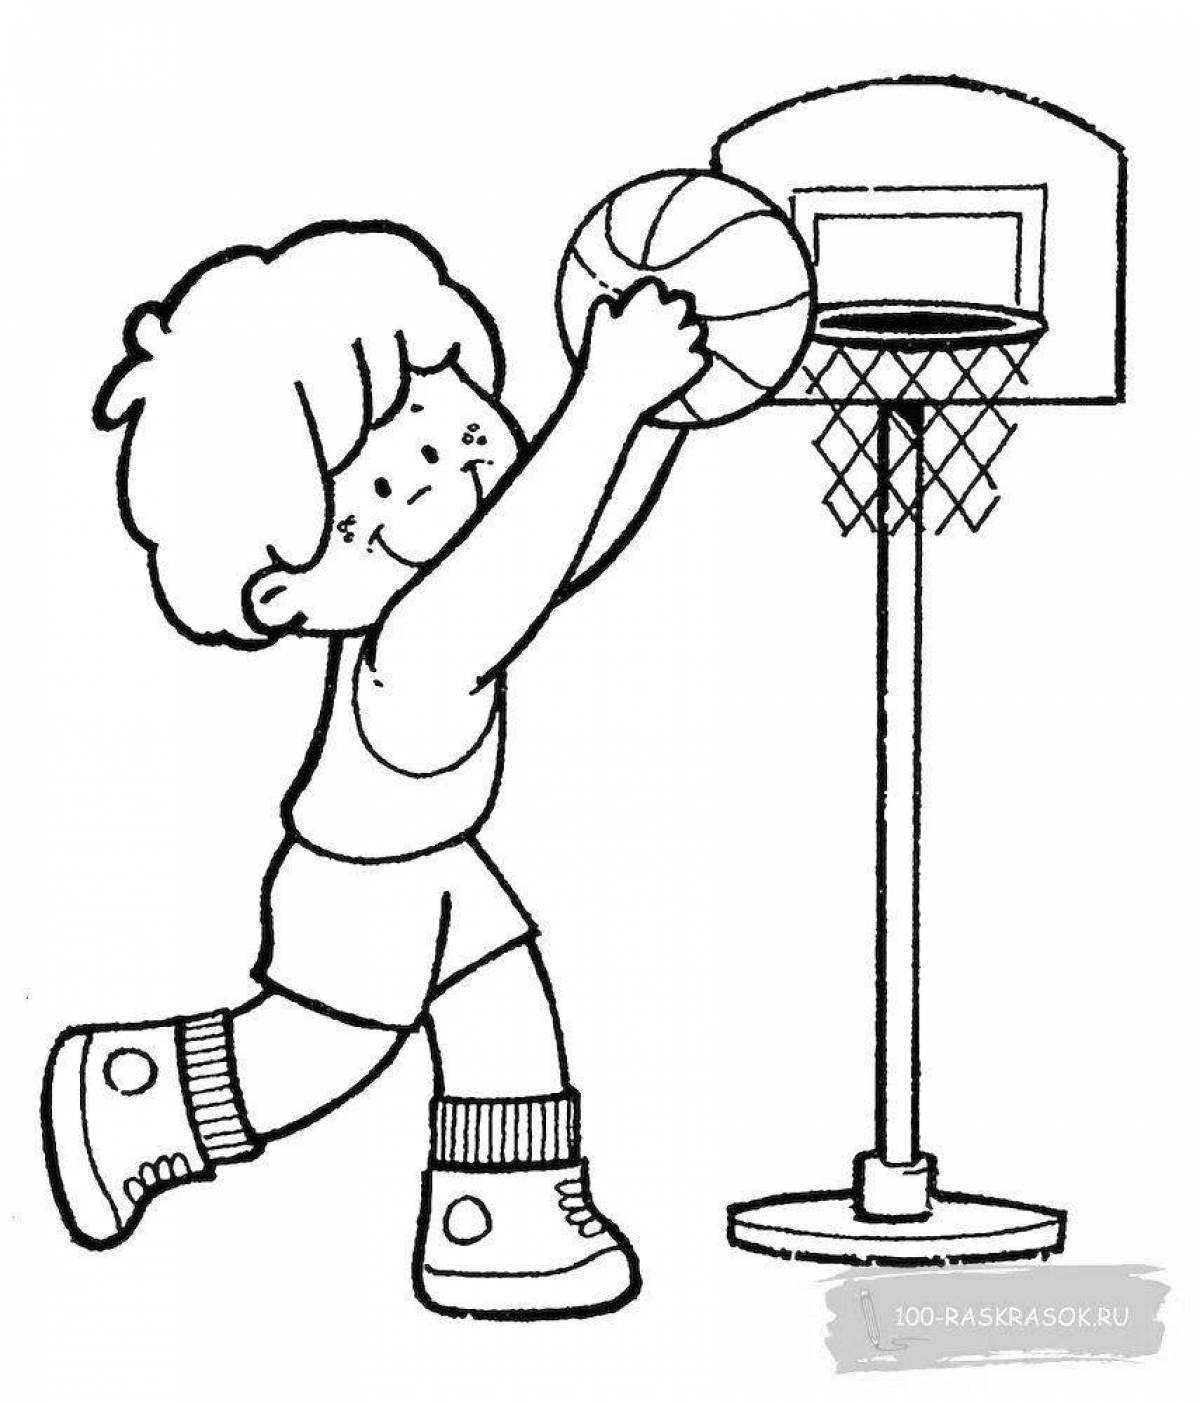 Lively sports coloring book for children 4-5 years old